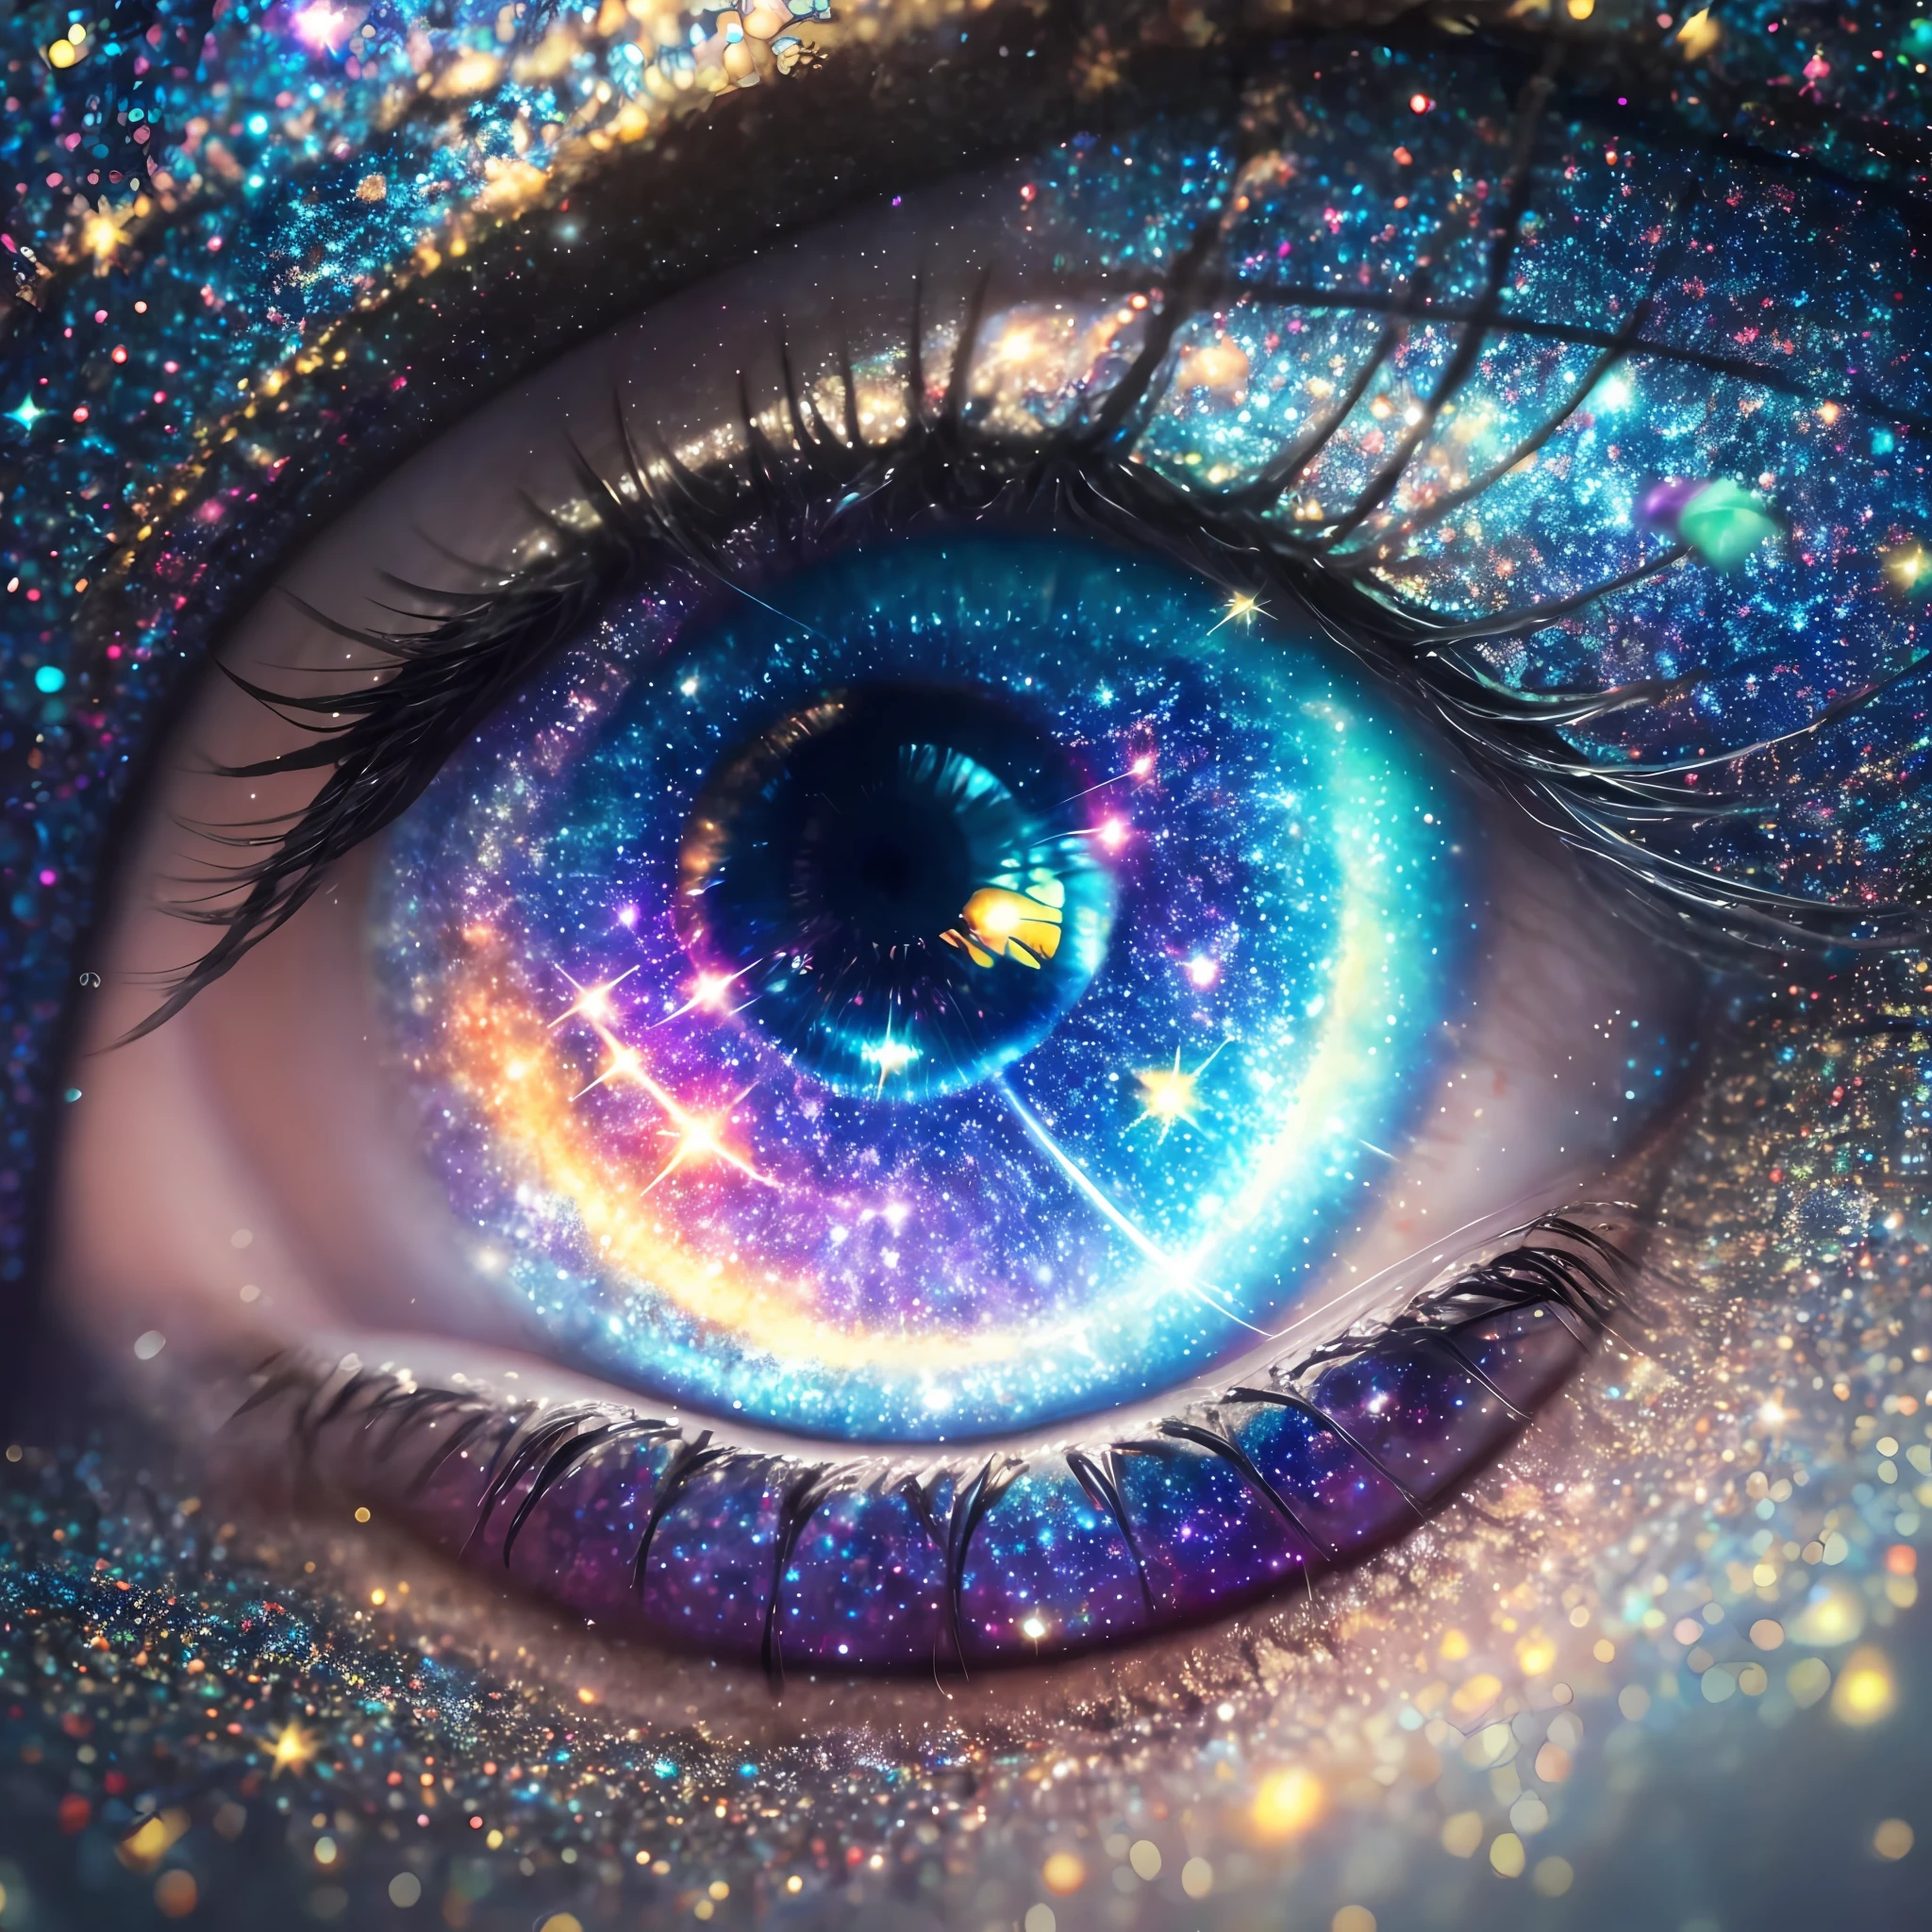 a close up of a person's eye with a galaxy in the background, galaxy in eyes, the eye of the universe, galaxy in the eye 👁️, stars are hidden in the eyes, galaxy eyes, looking out into the cosmos, beautiful glowing galaxy eyes, stars as eyes, channeling third eye energy, magical eyes, deeper into the metaverse we go